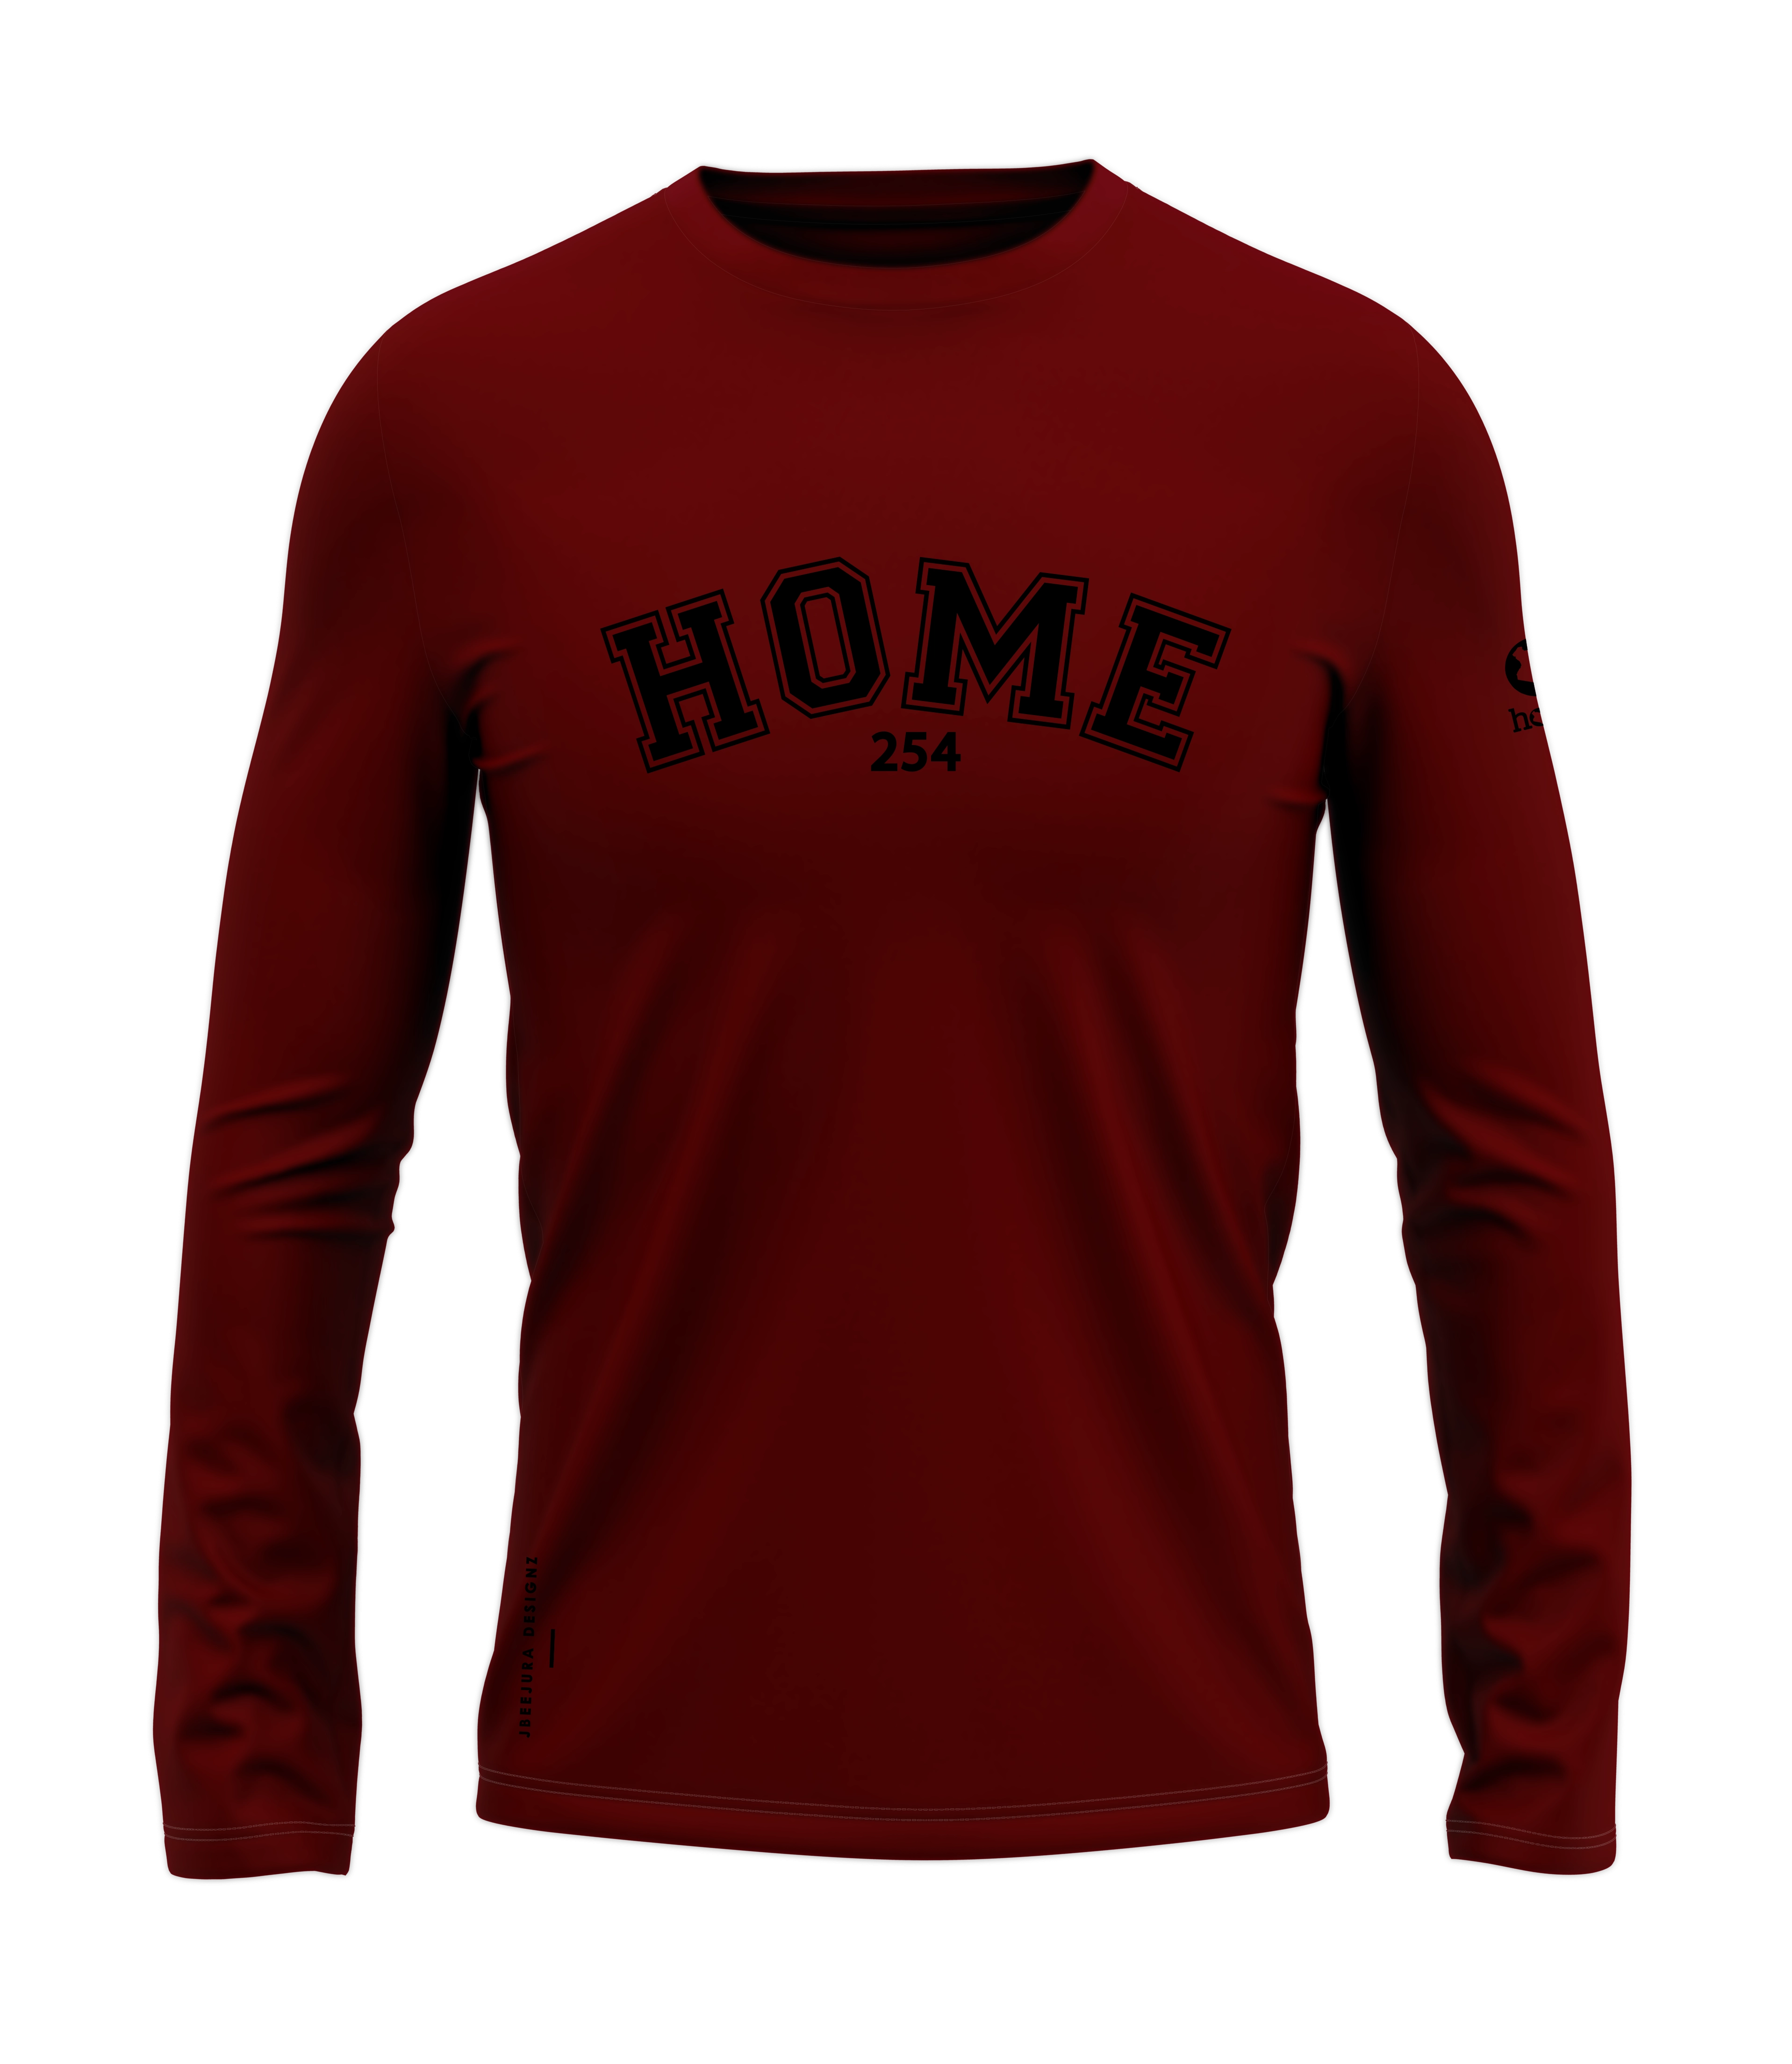 home_254 LONG-SLEEVED MAROON RED T-SHIRT WITH A BLACK COLLEGE PRINT – COTTON PLUS FABRIC